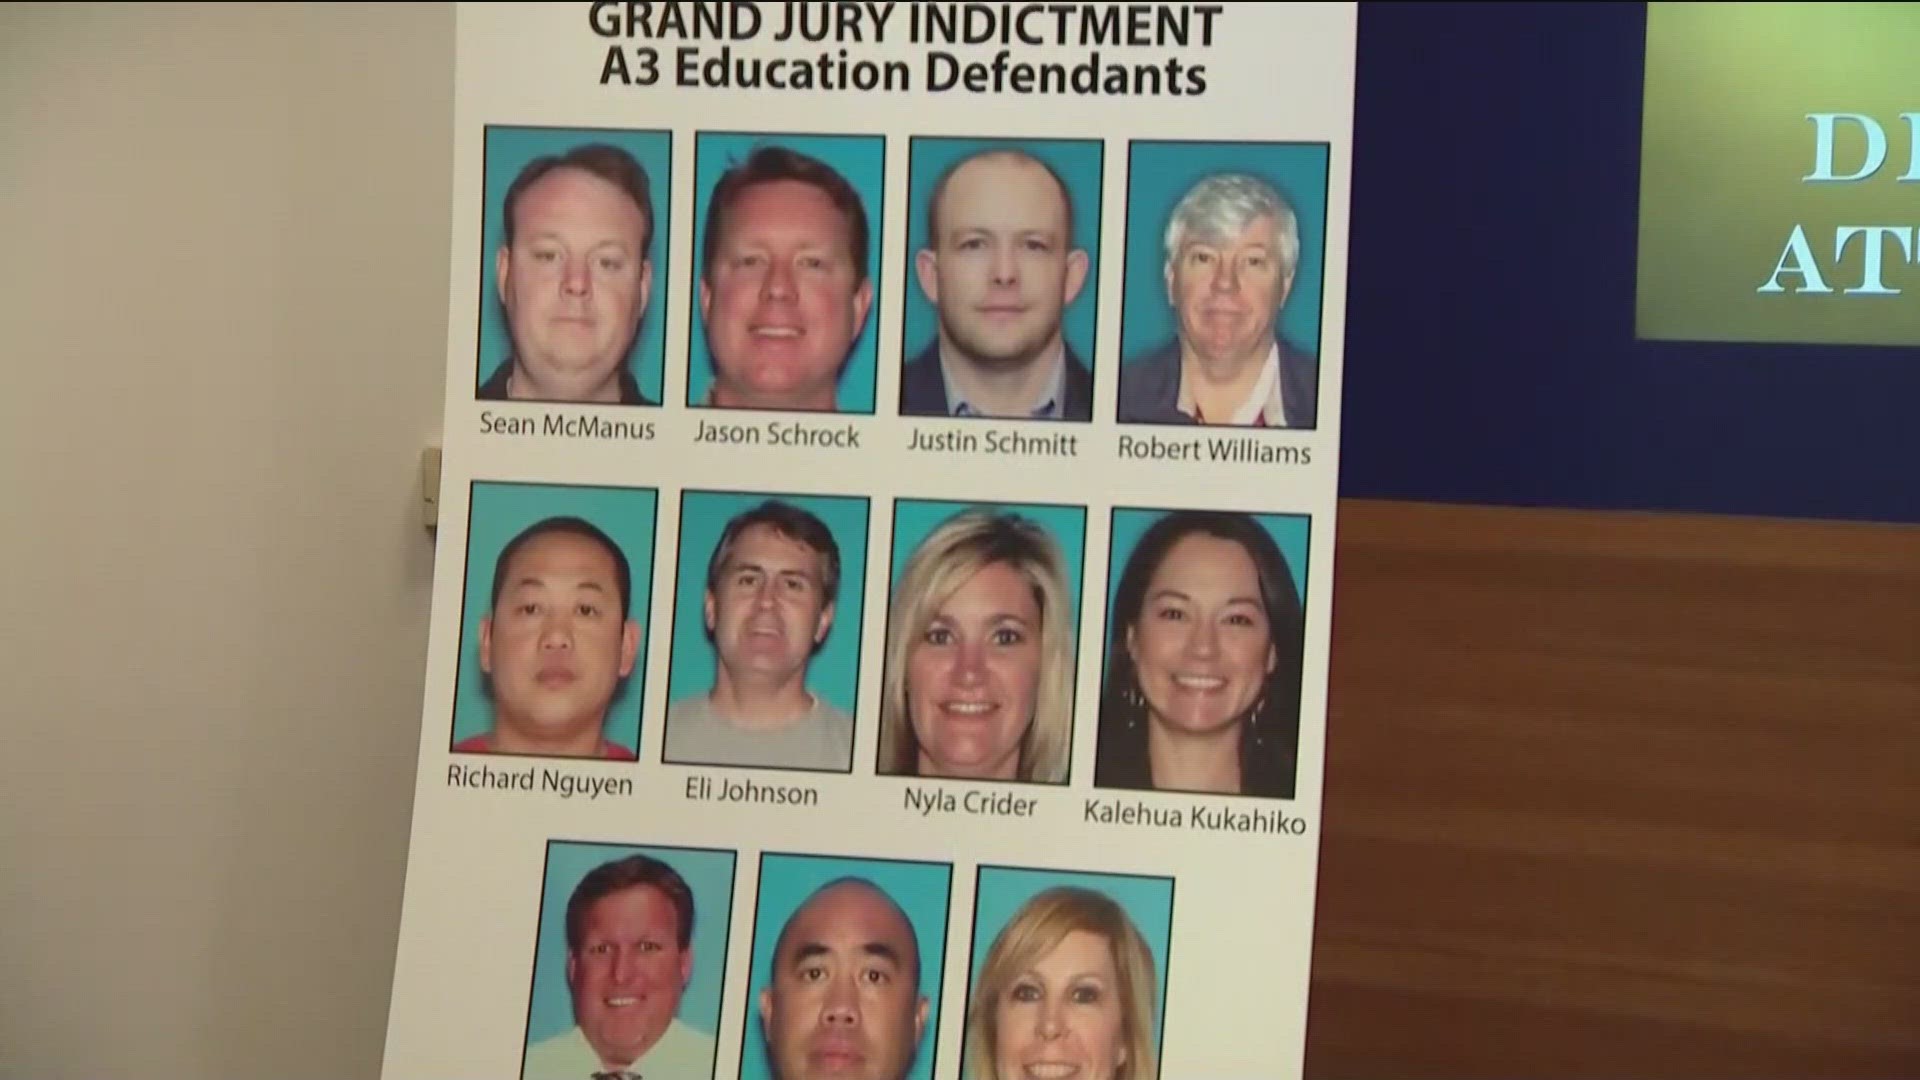 The task force formed as a result of a 2019 San Diego case, which found 11 people defrauded the state of $400 million.